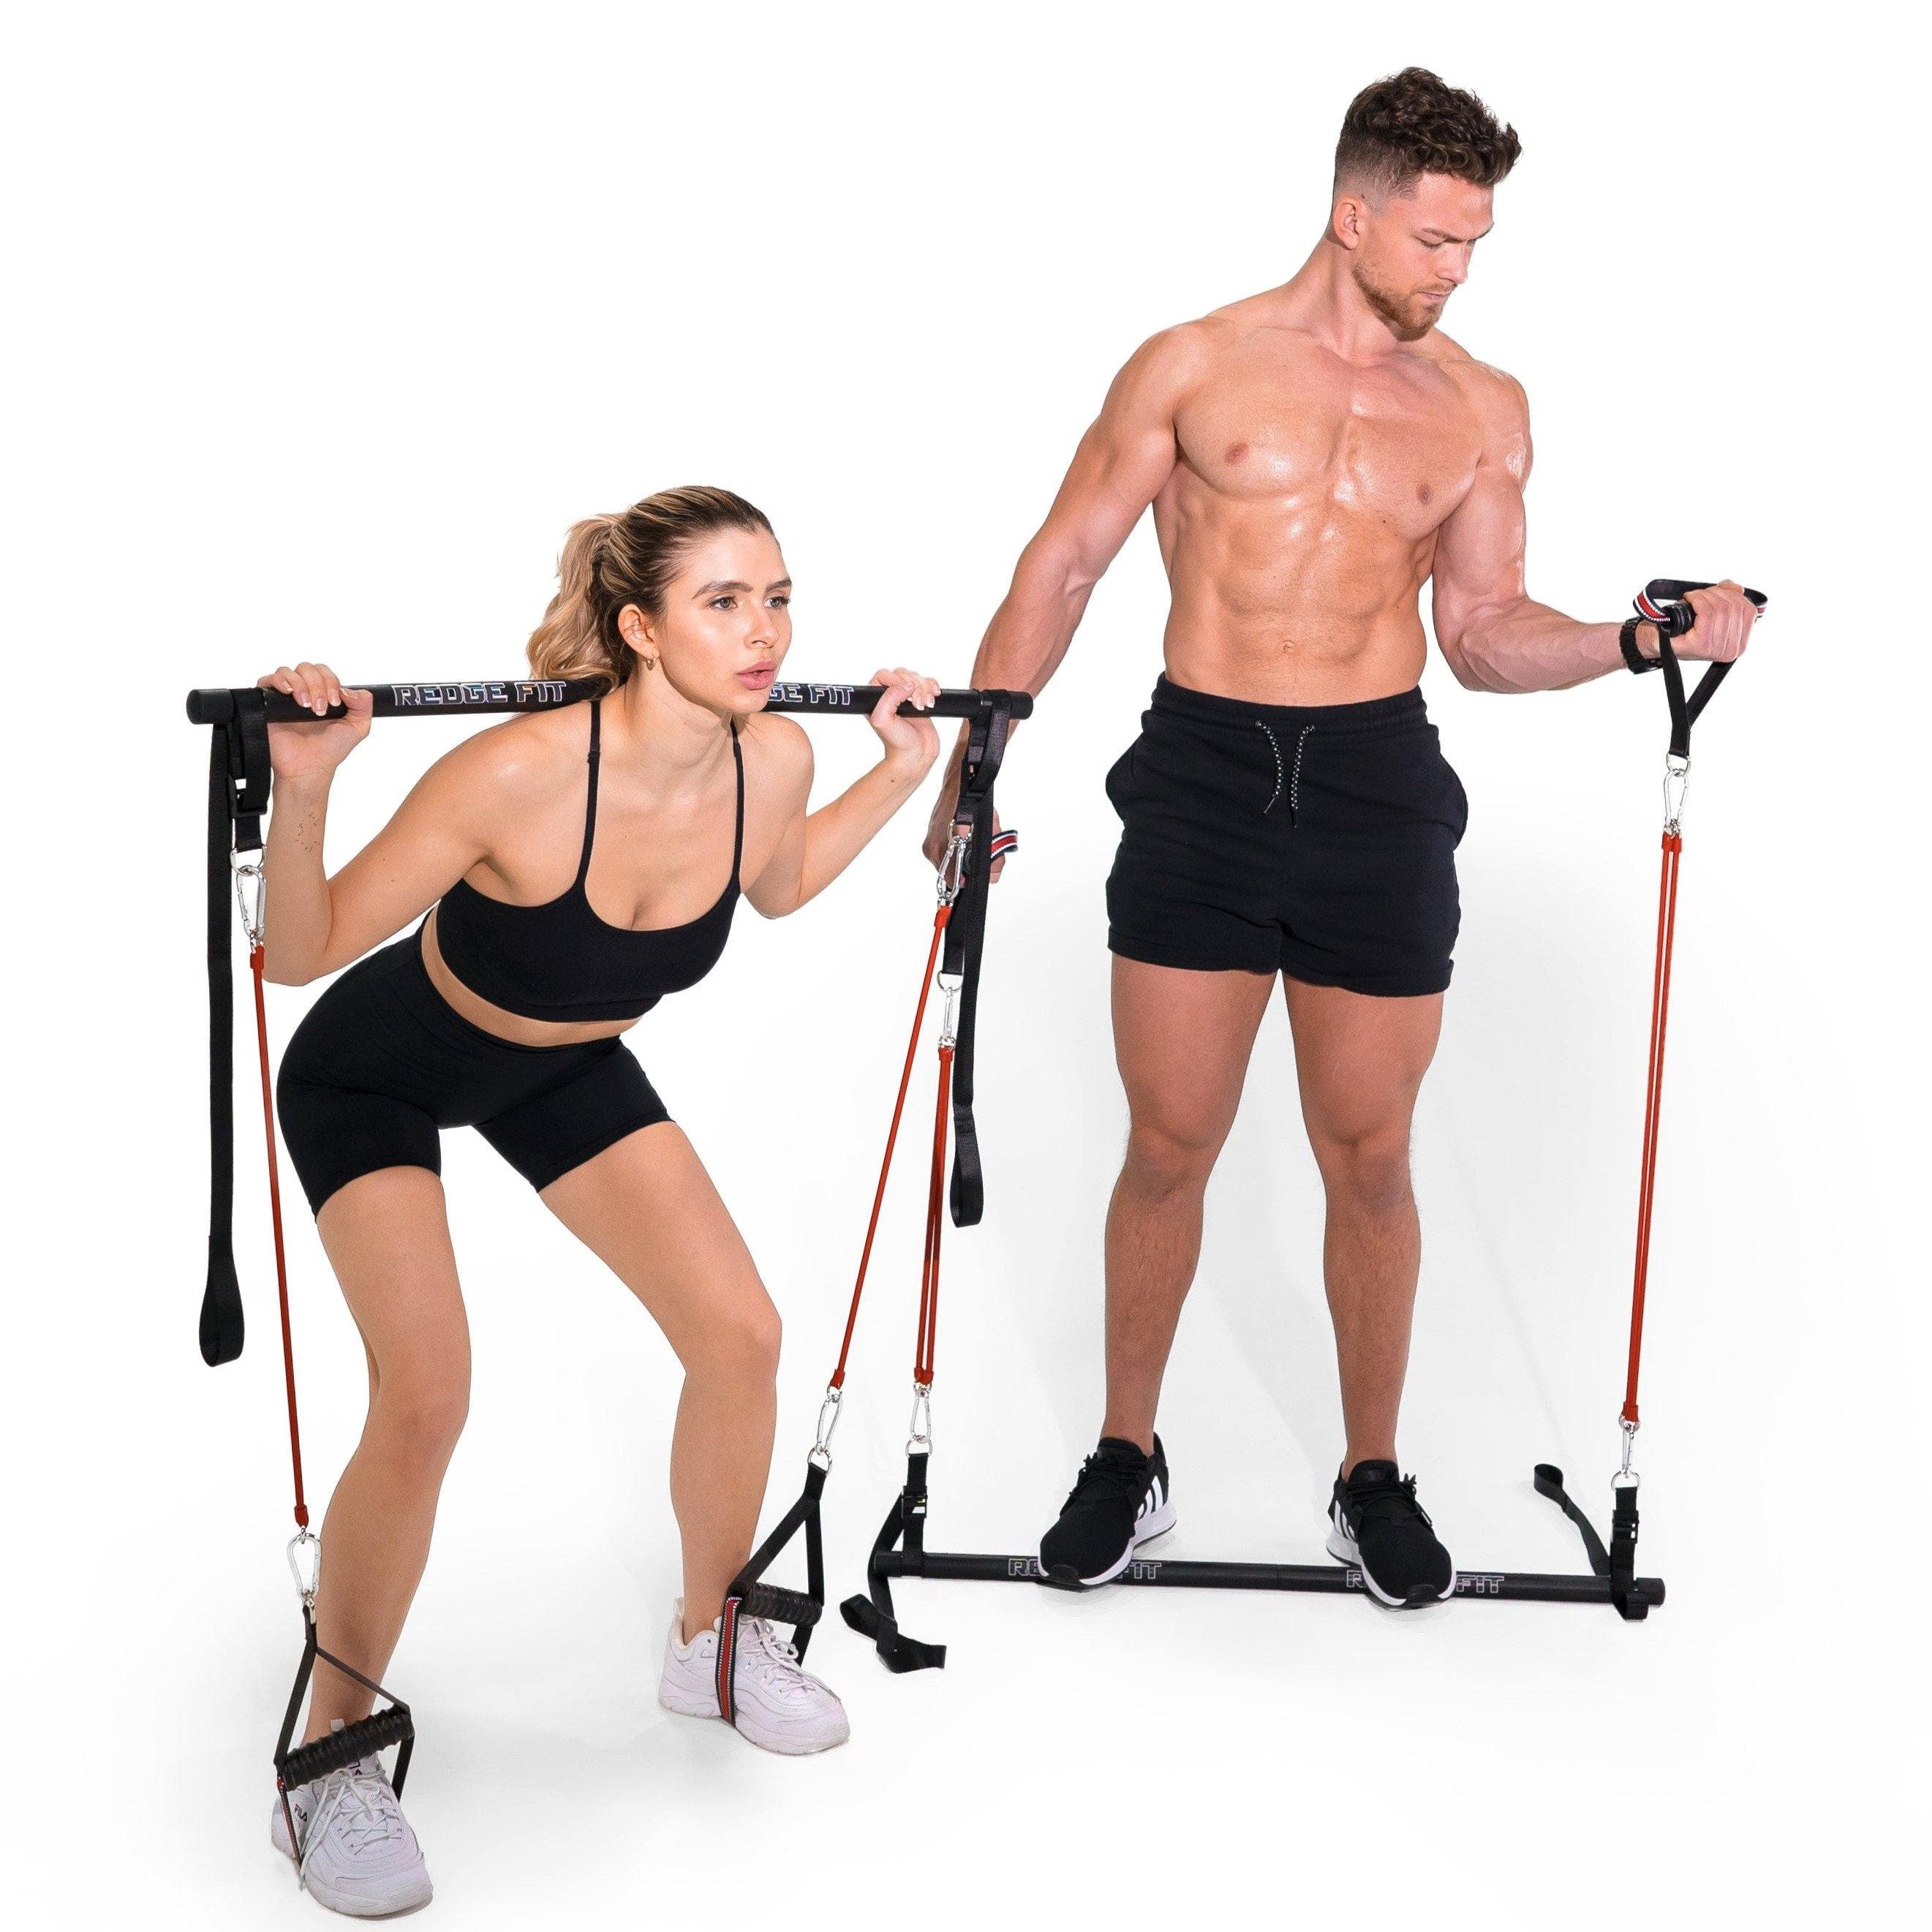 Man and Woman modeling the Redge Fit Home Gym Intermediate Pack Portable Gym Machine Available at https://www.getredge.com/products/home-gym-intermediate-pack